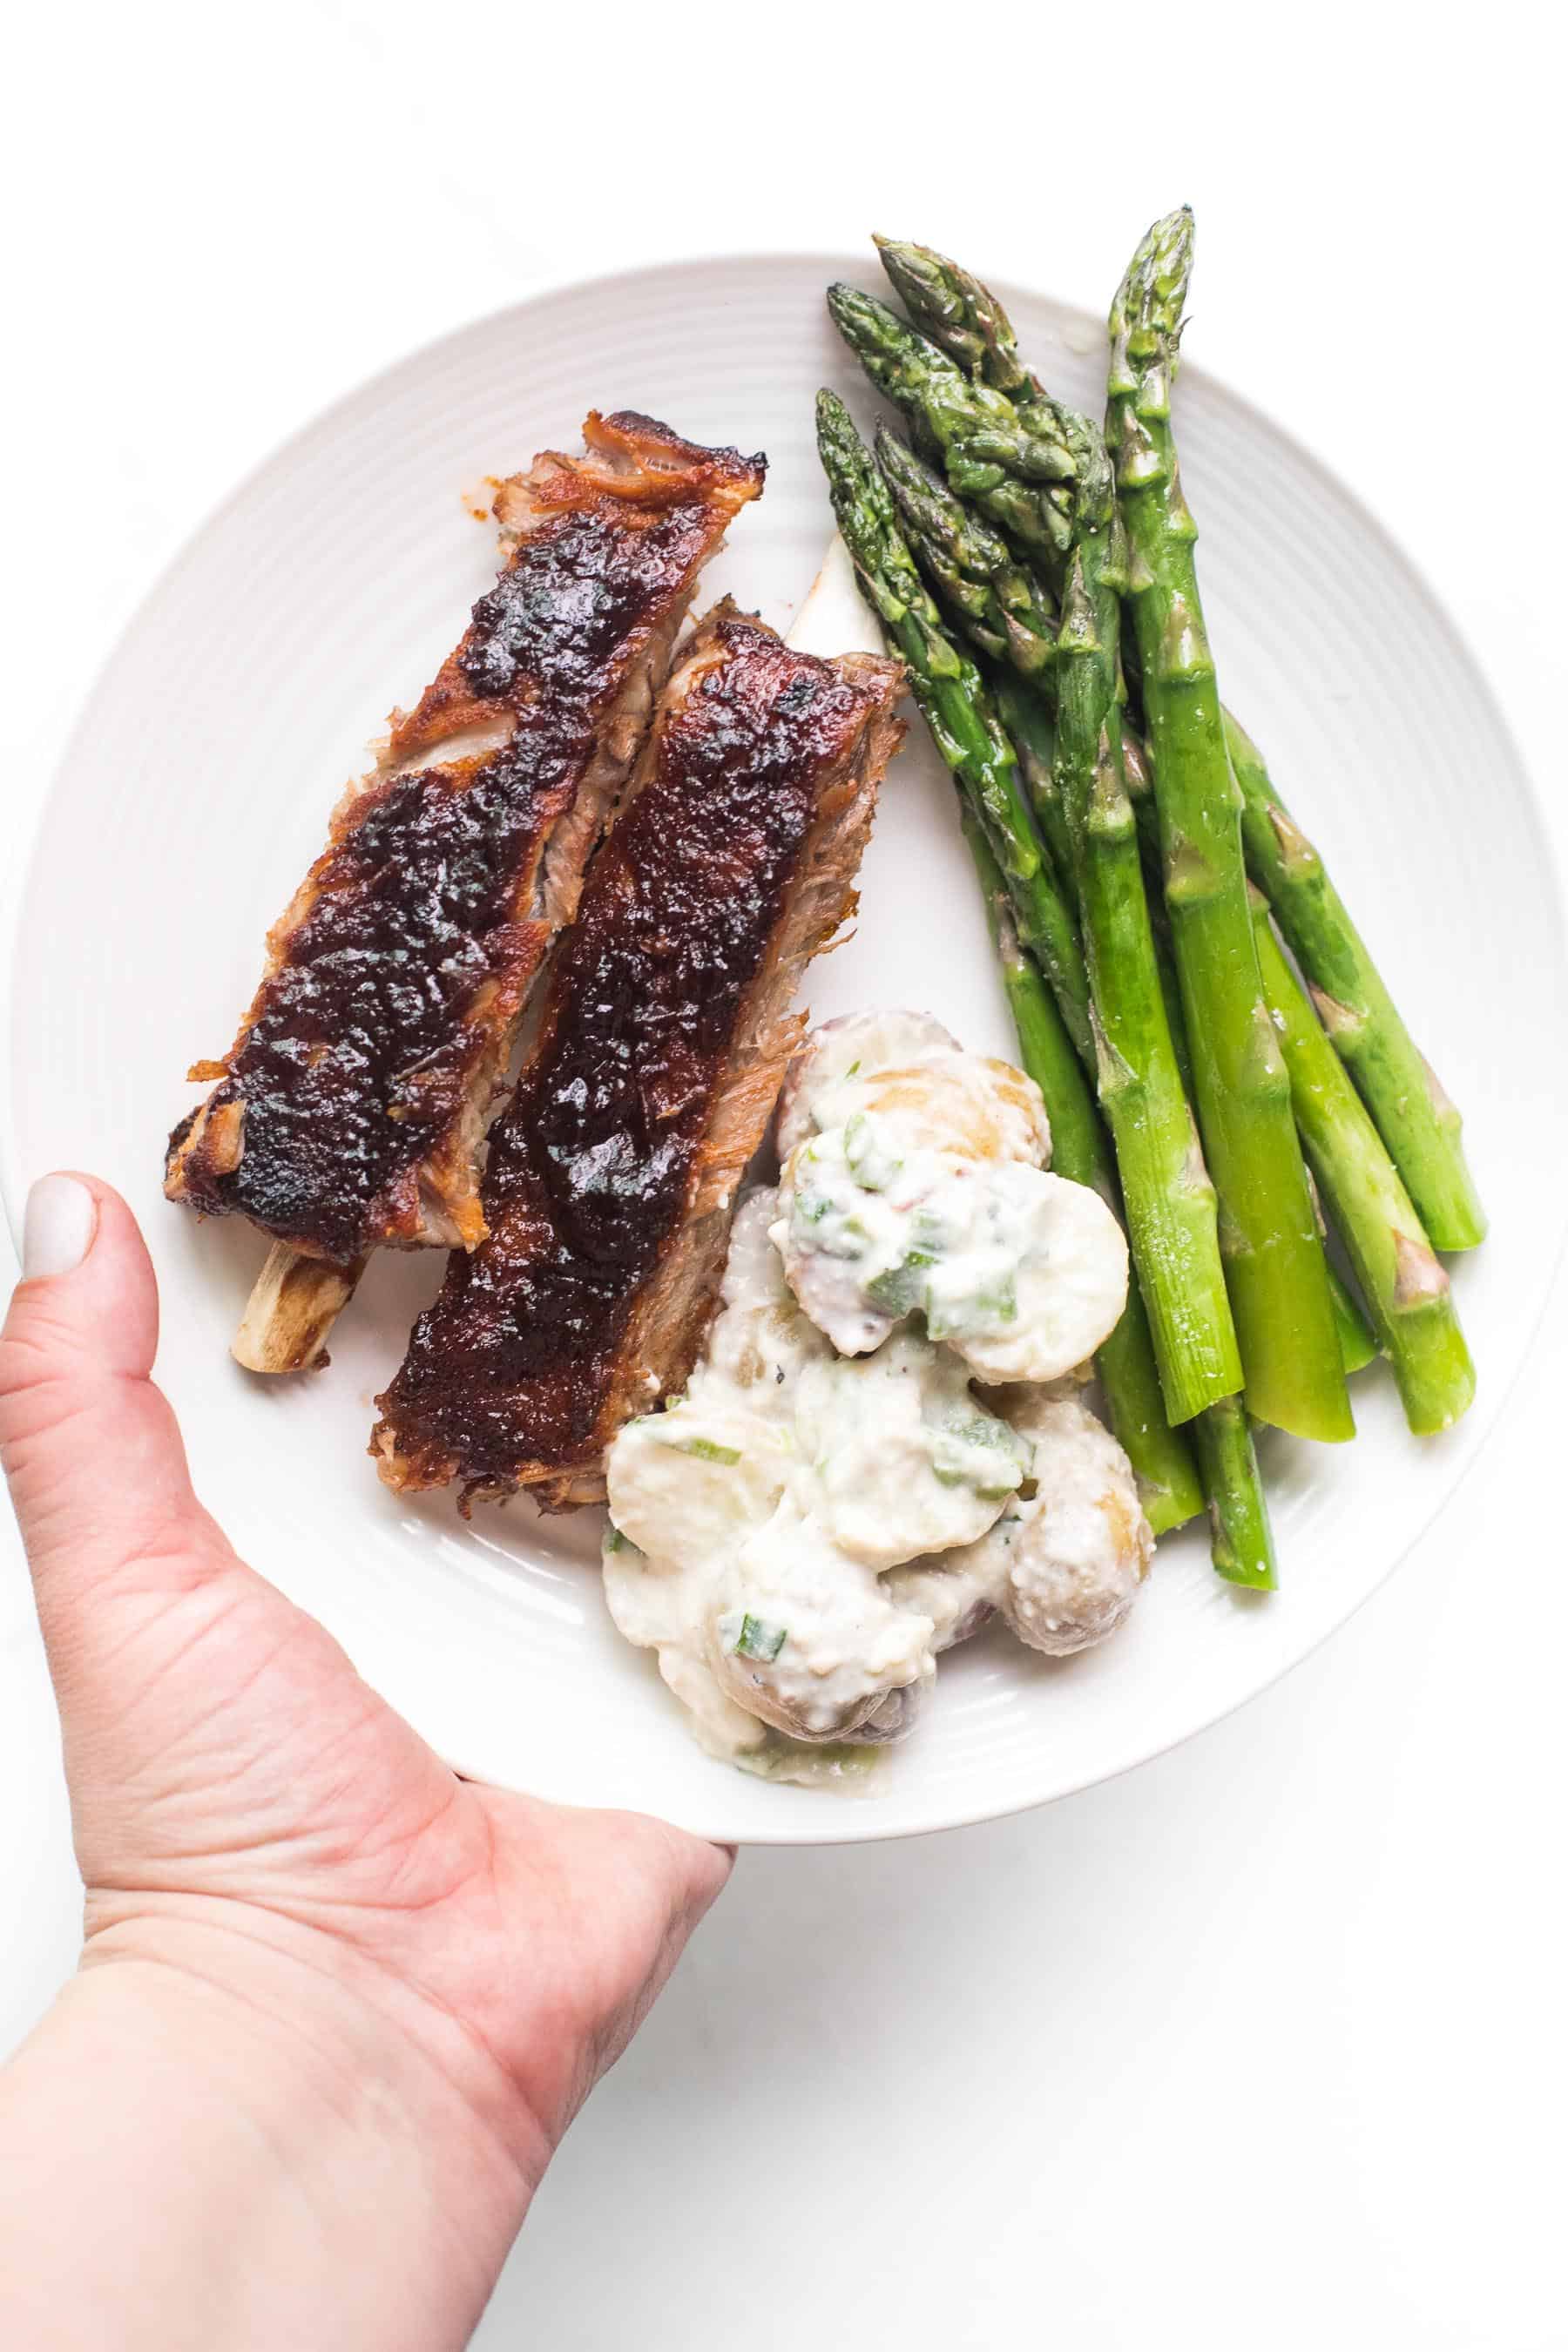 hand holding a white plate with ribs, asparagus and potato salad on a white background